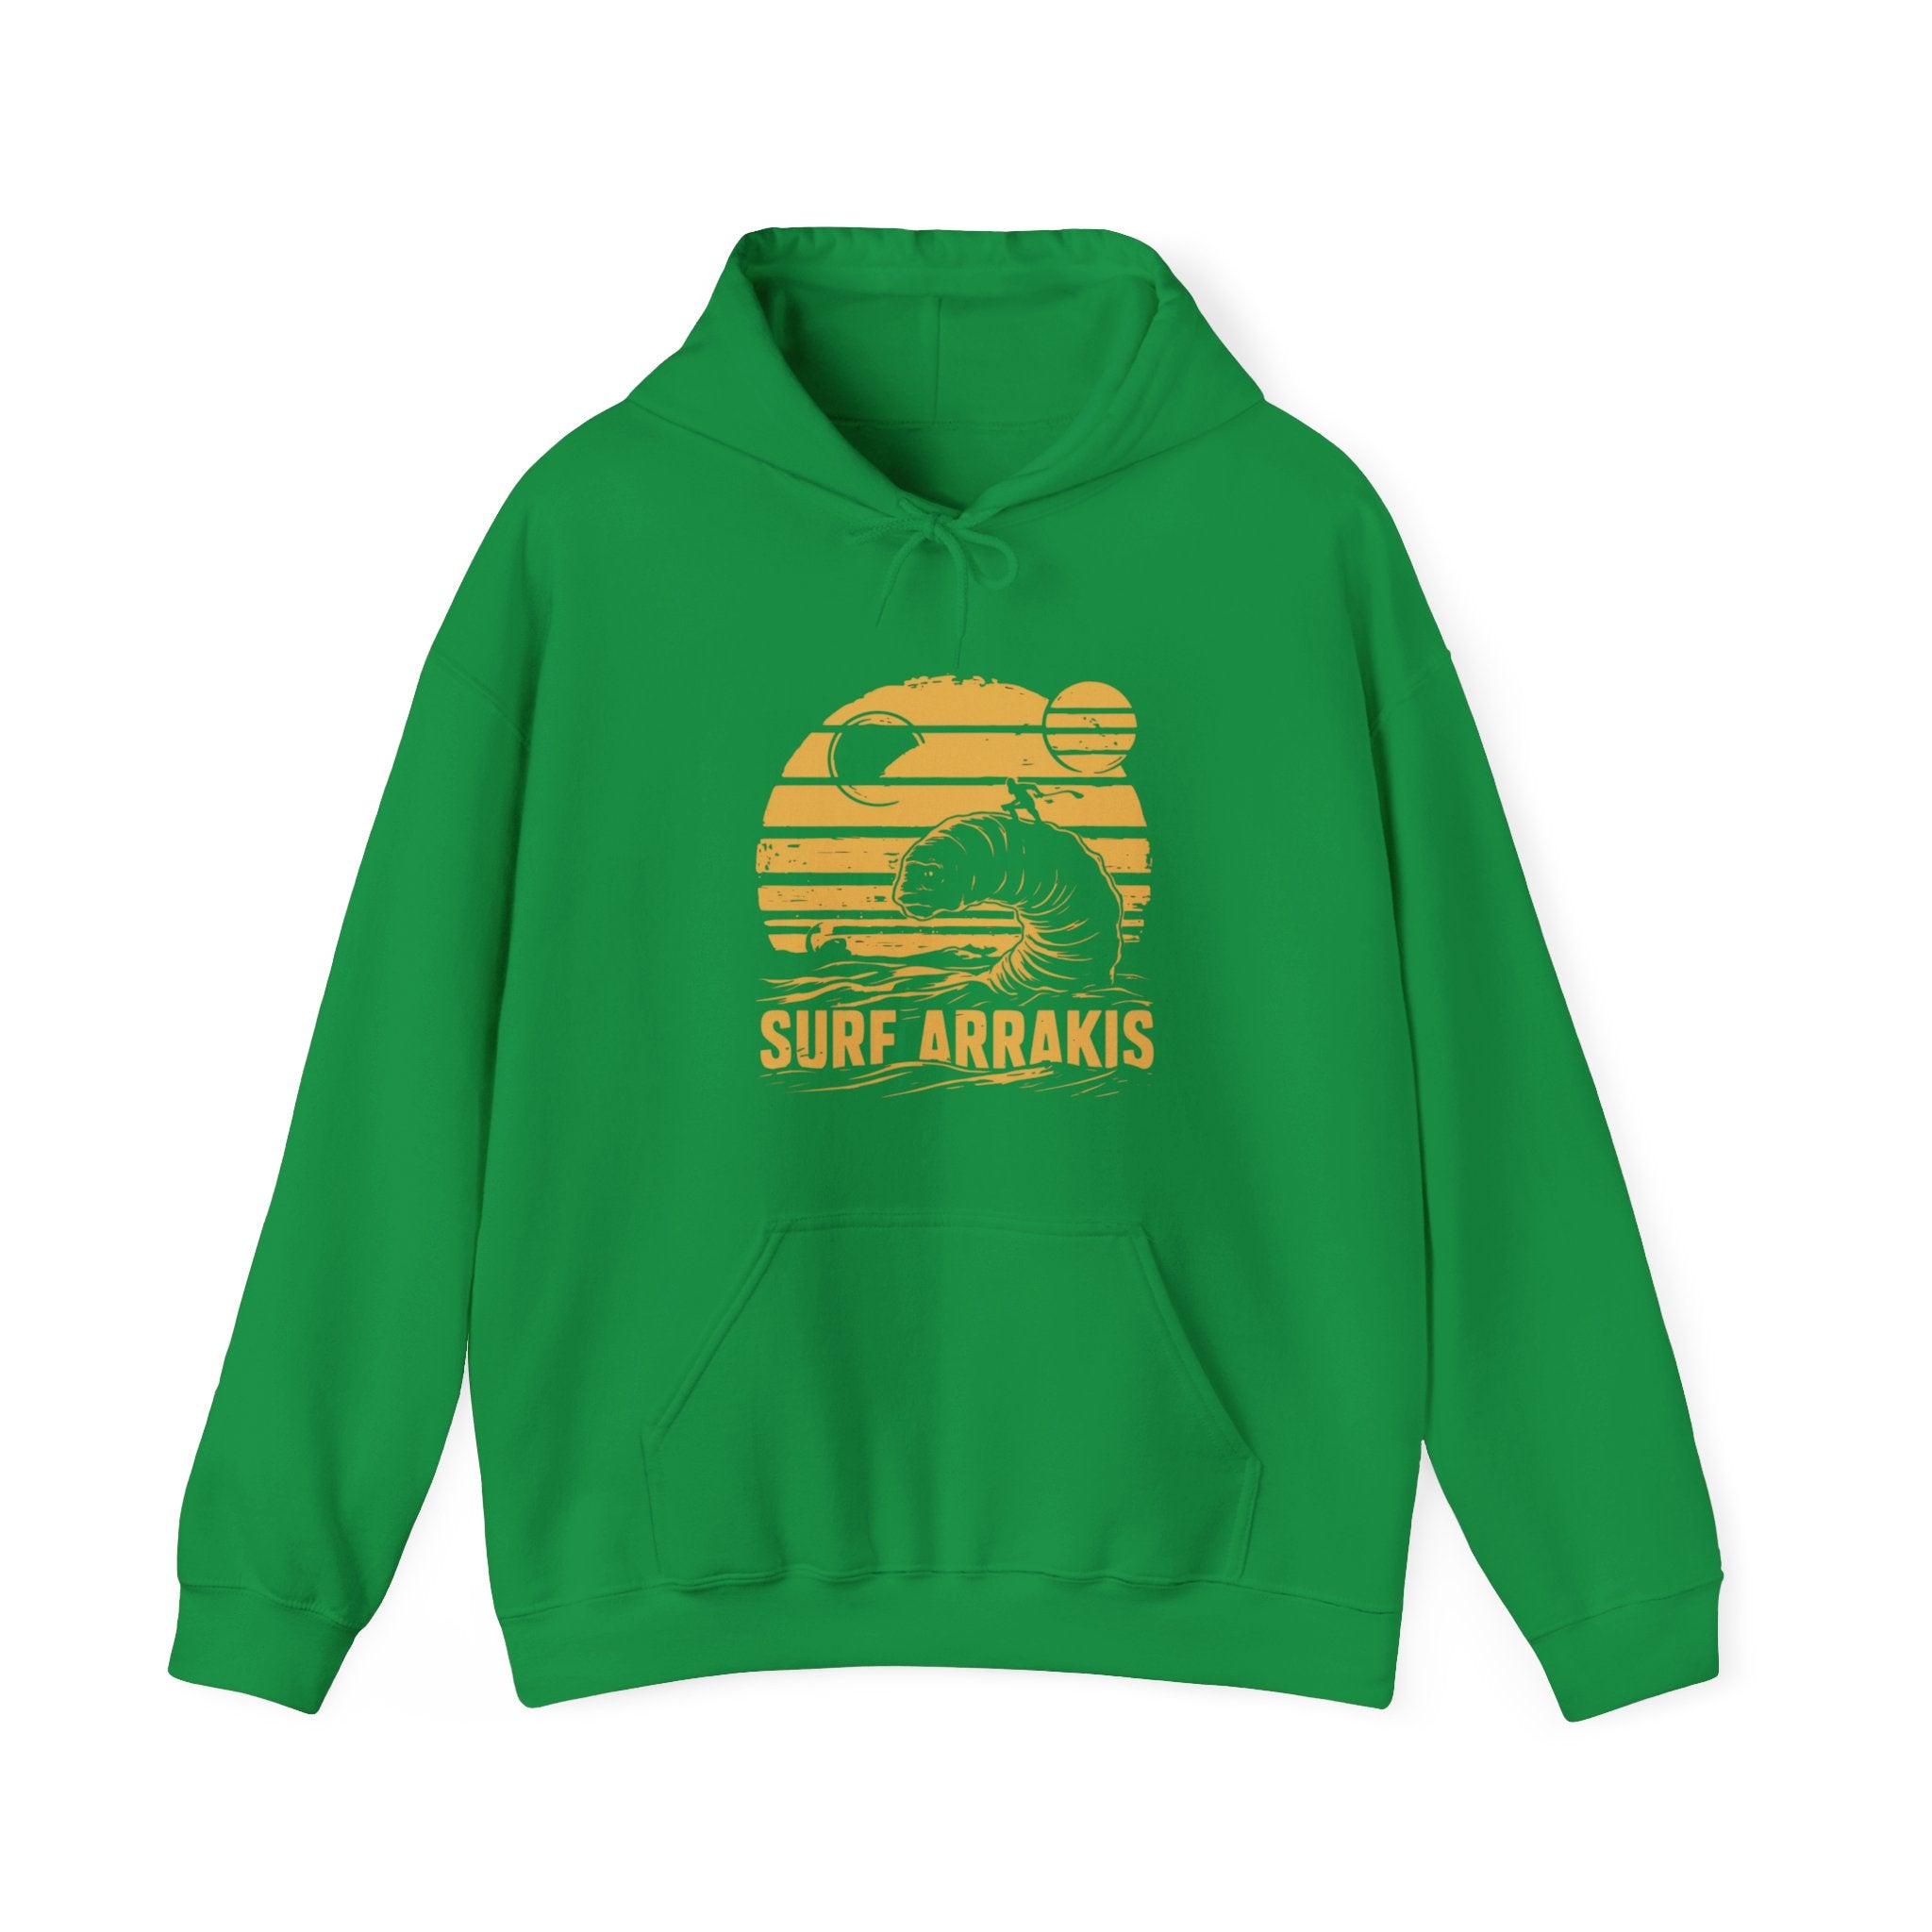 Surf Arrakis - Hooded Sweatshirt with a design of a sand dune, moons, and the text "SURF ARRAKIS" on the front.